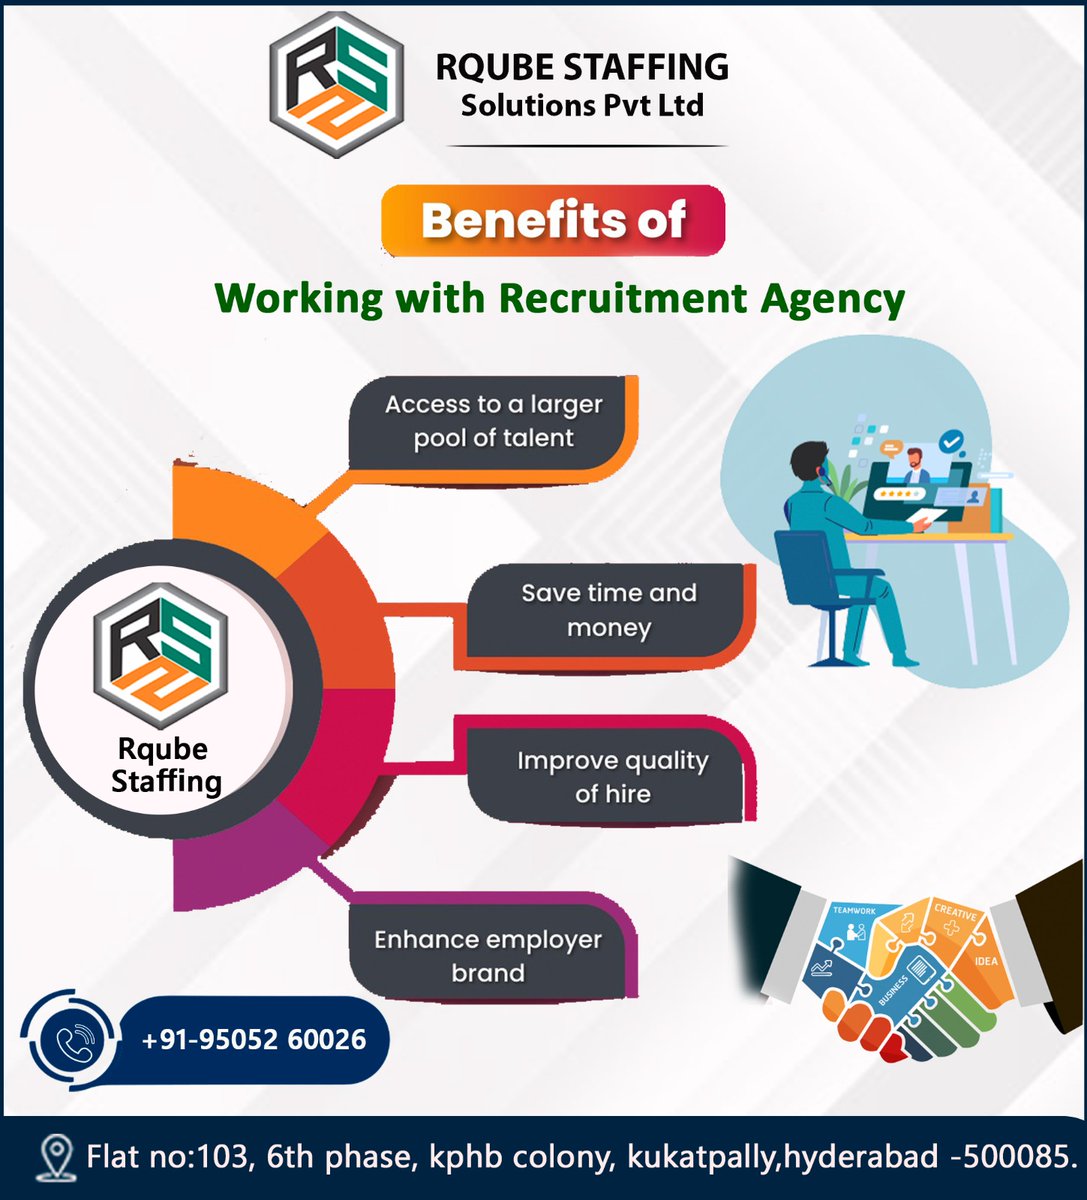 Benefits of working with Recruitment  Agency
contact :+91 95052 60026
#recruitmentagency #beststaffingagency # #skilledManpower
#rqubeprivatelimited #professionalITcandidates #professionalstaff
#staffingsupport #Rqube #recruitmentprocess